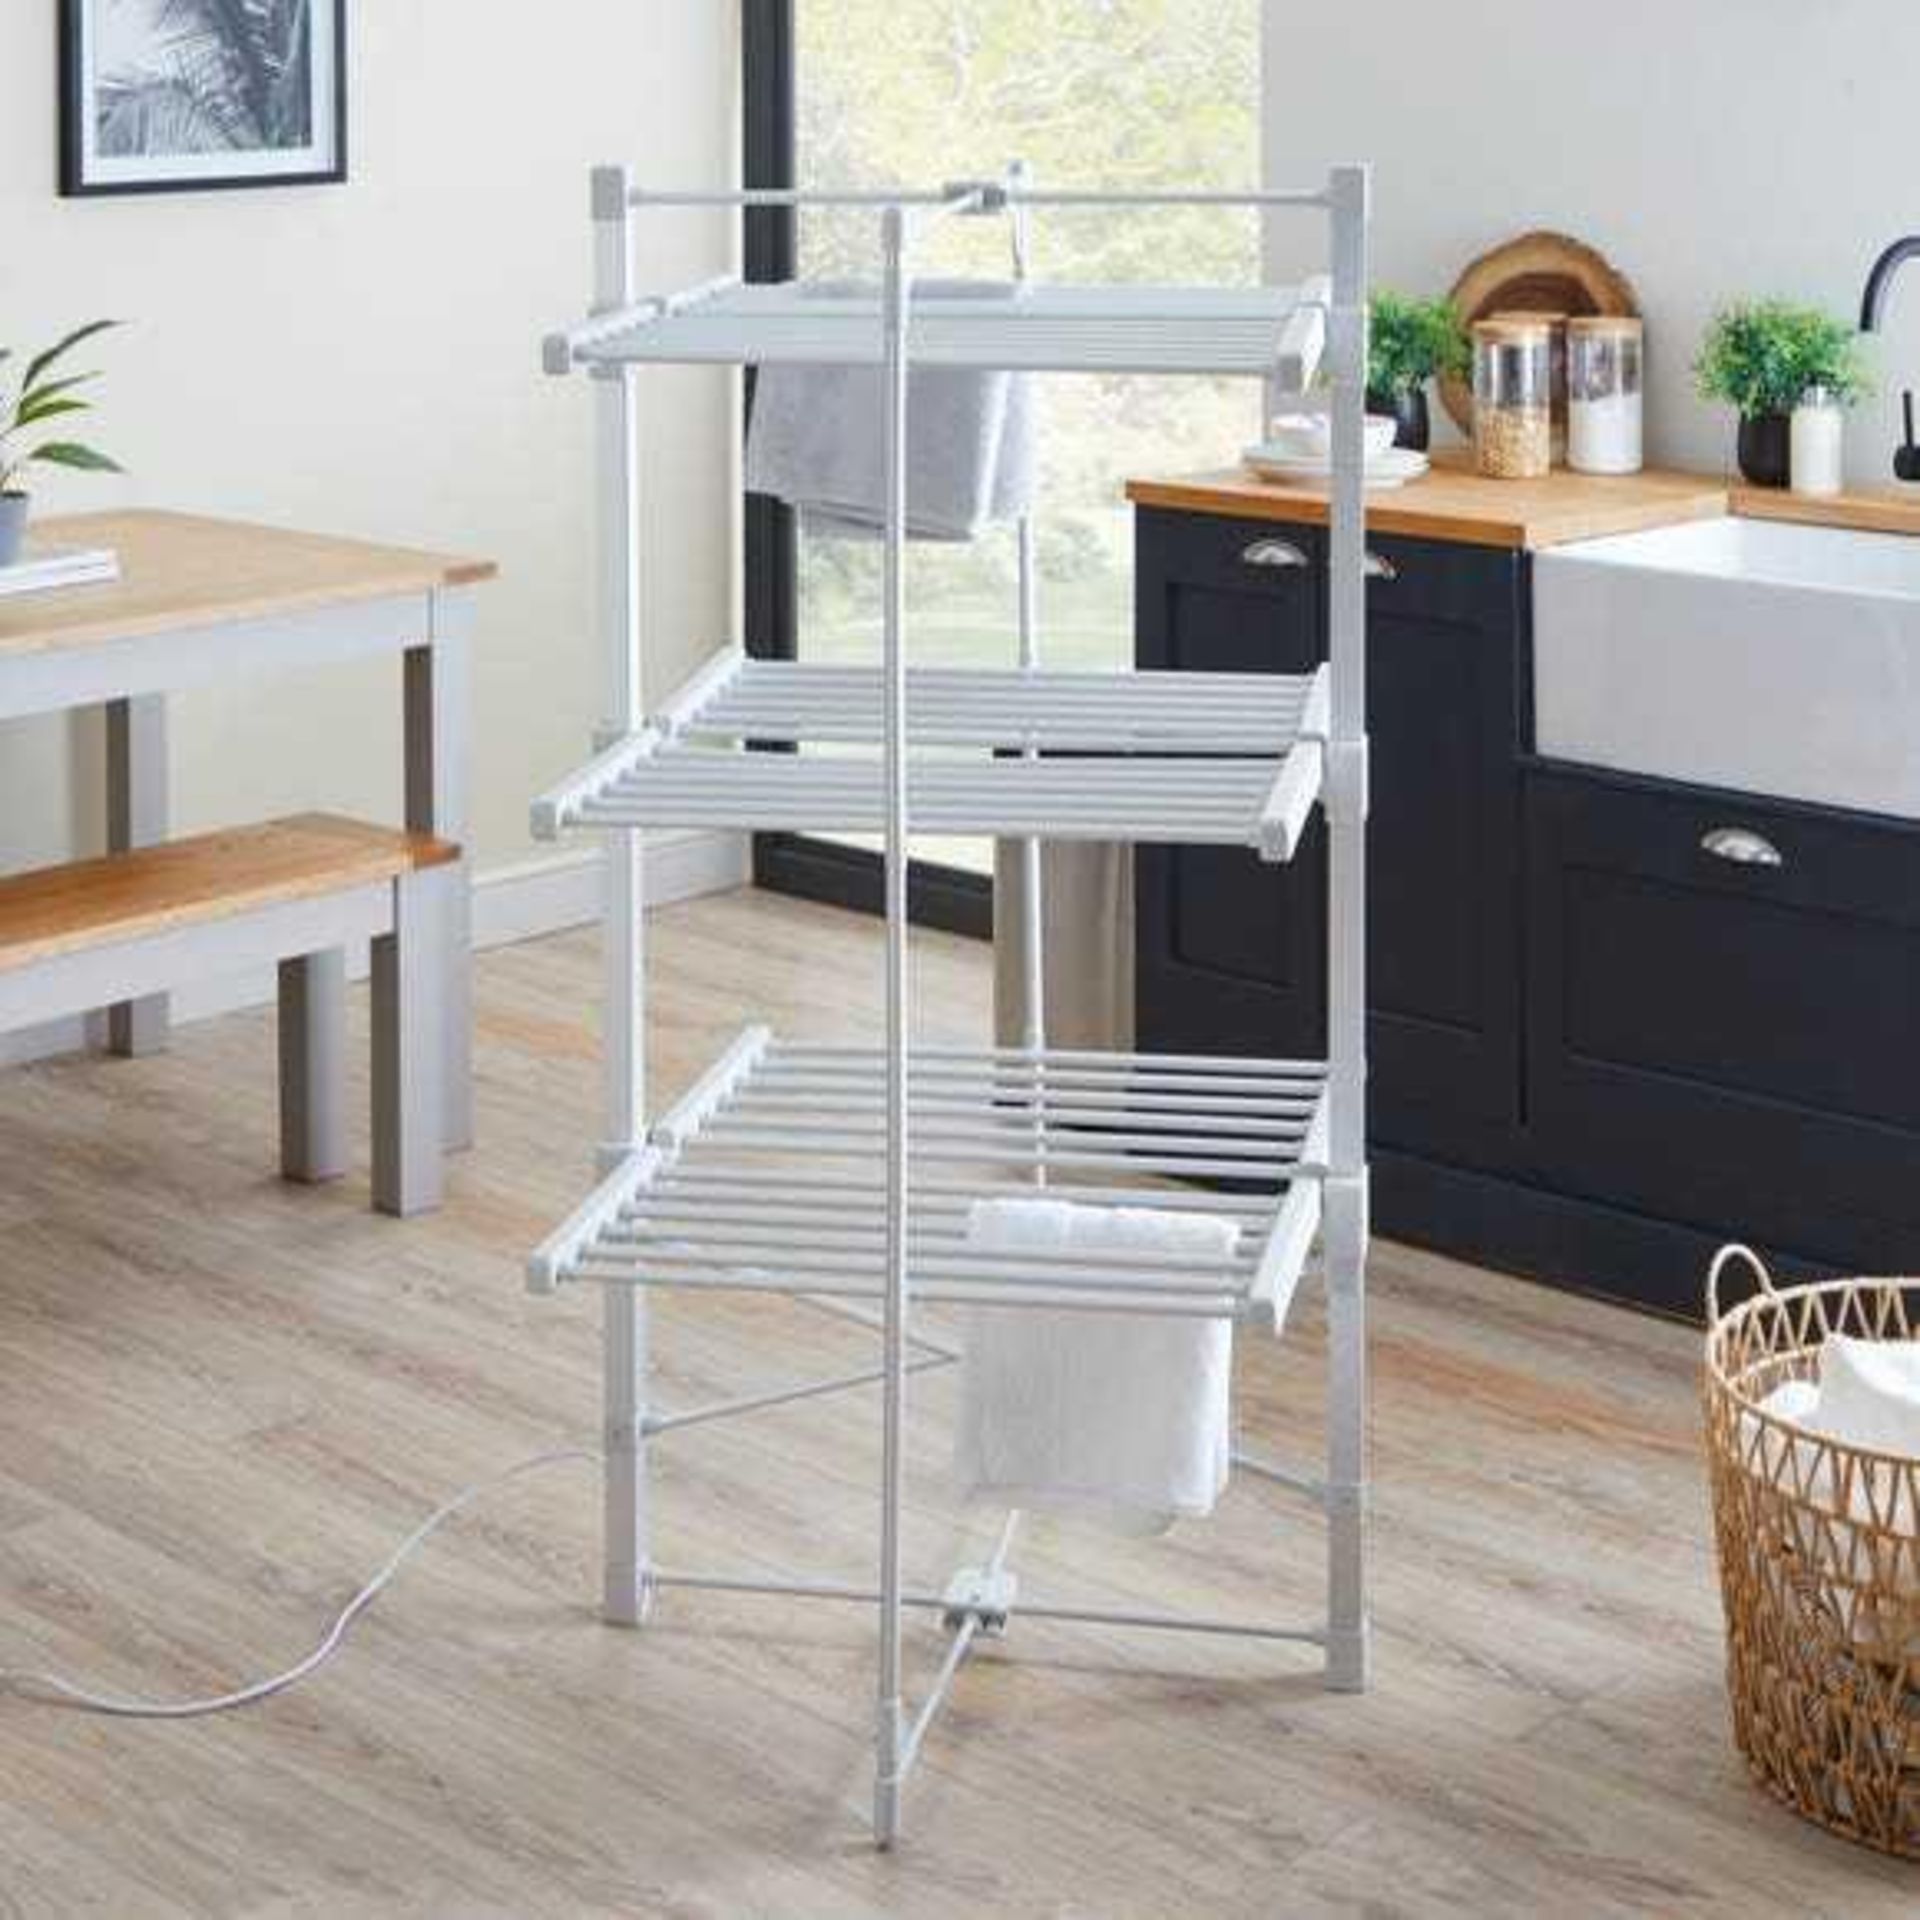 RRP £100 Lot To Contain X2 Items, Cottingham 50Cm Silent Wall Clock, Tower Airer Folding Drying Rack